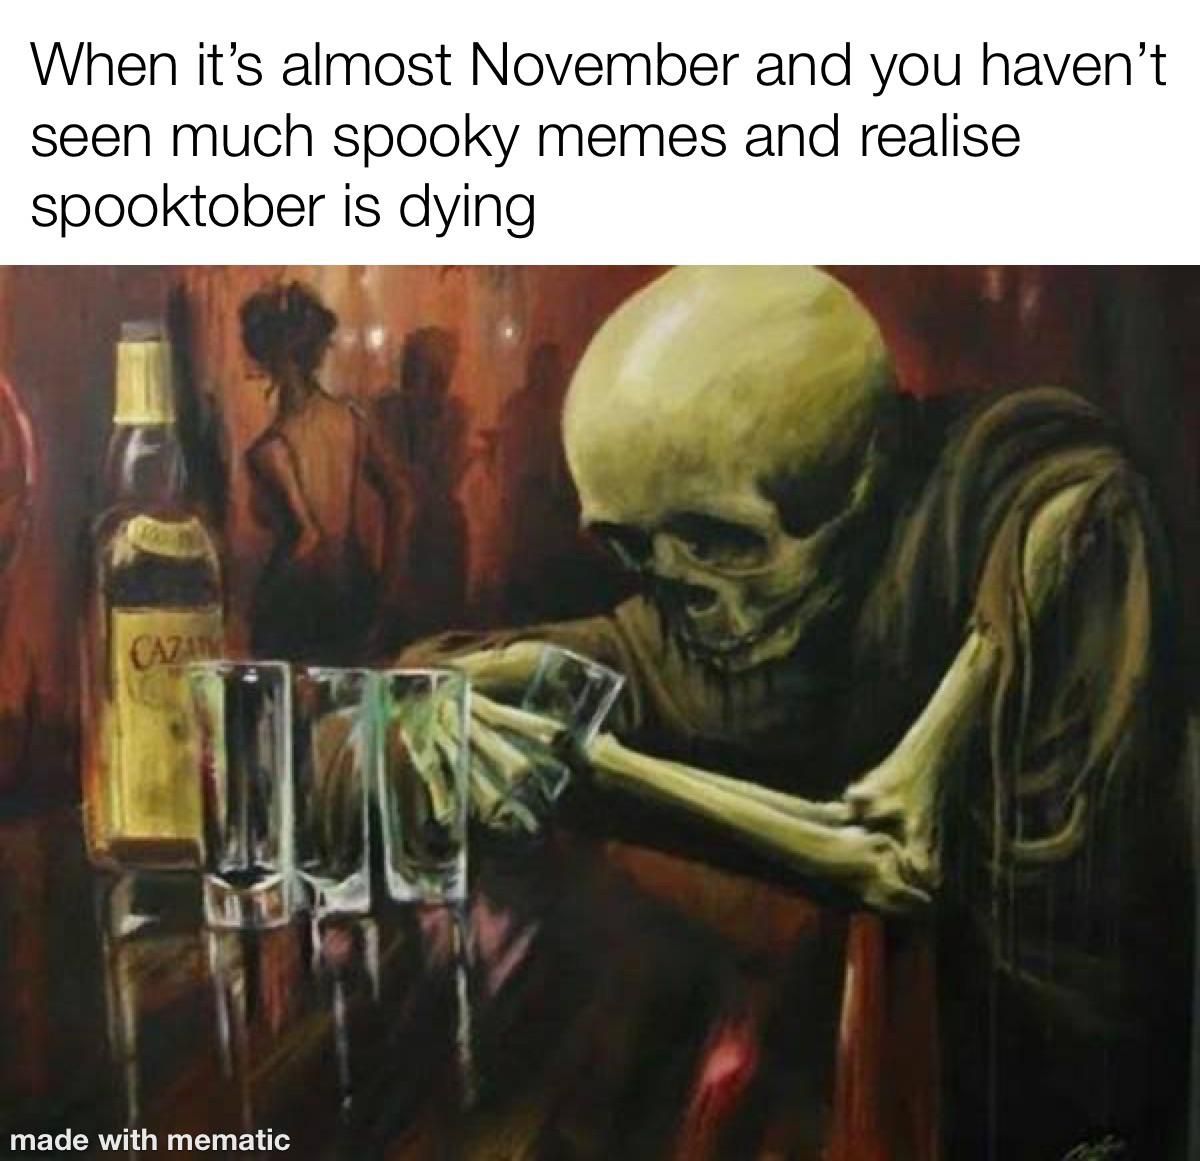 The fall of spooktober